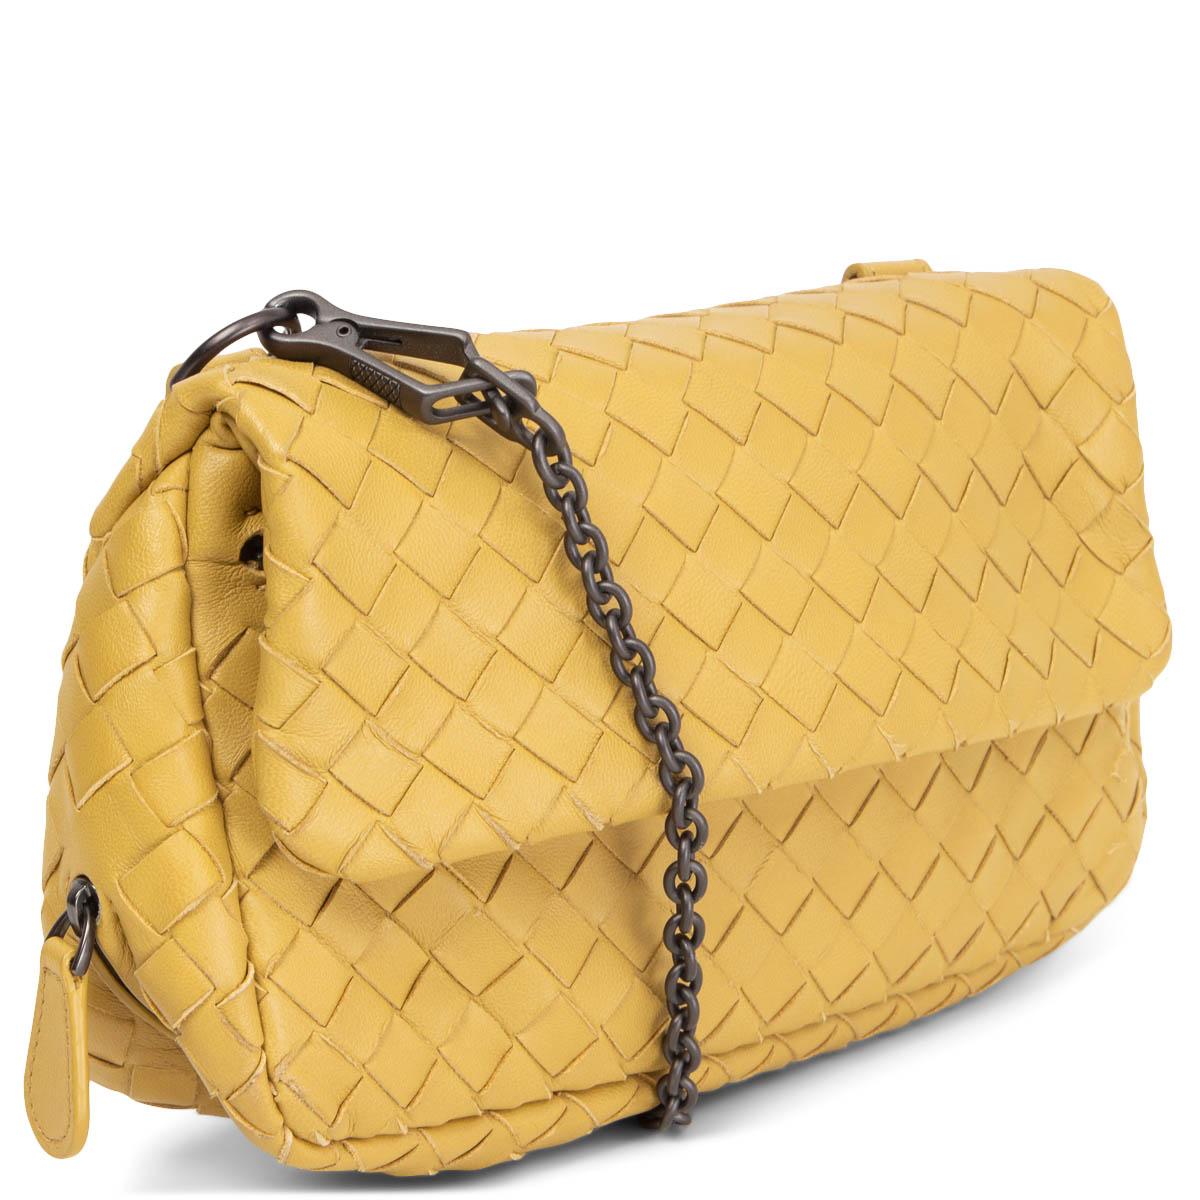 100% authentic Bottega Veneta Expandable Chain Small Crossbody Bag in signature Intrecciato in citrus moutard nappa leather. The front flap opens to a taupe suede lined interior featuring a hidden zip pocket at the bottom and a zipper pocket under